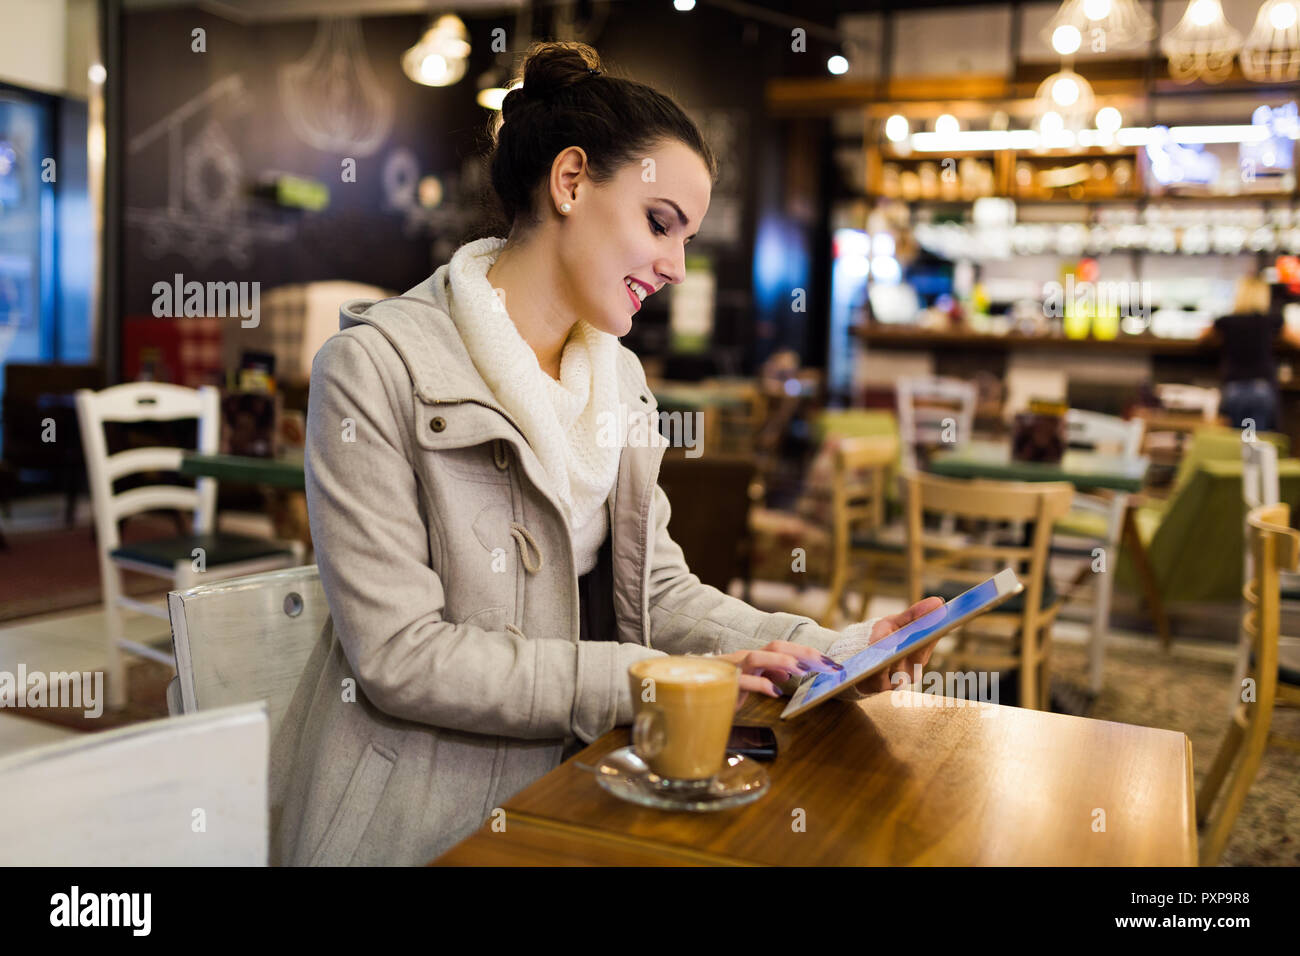 Attractive young woman using tablet in cafe Stock Photo